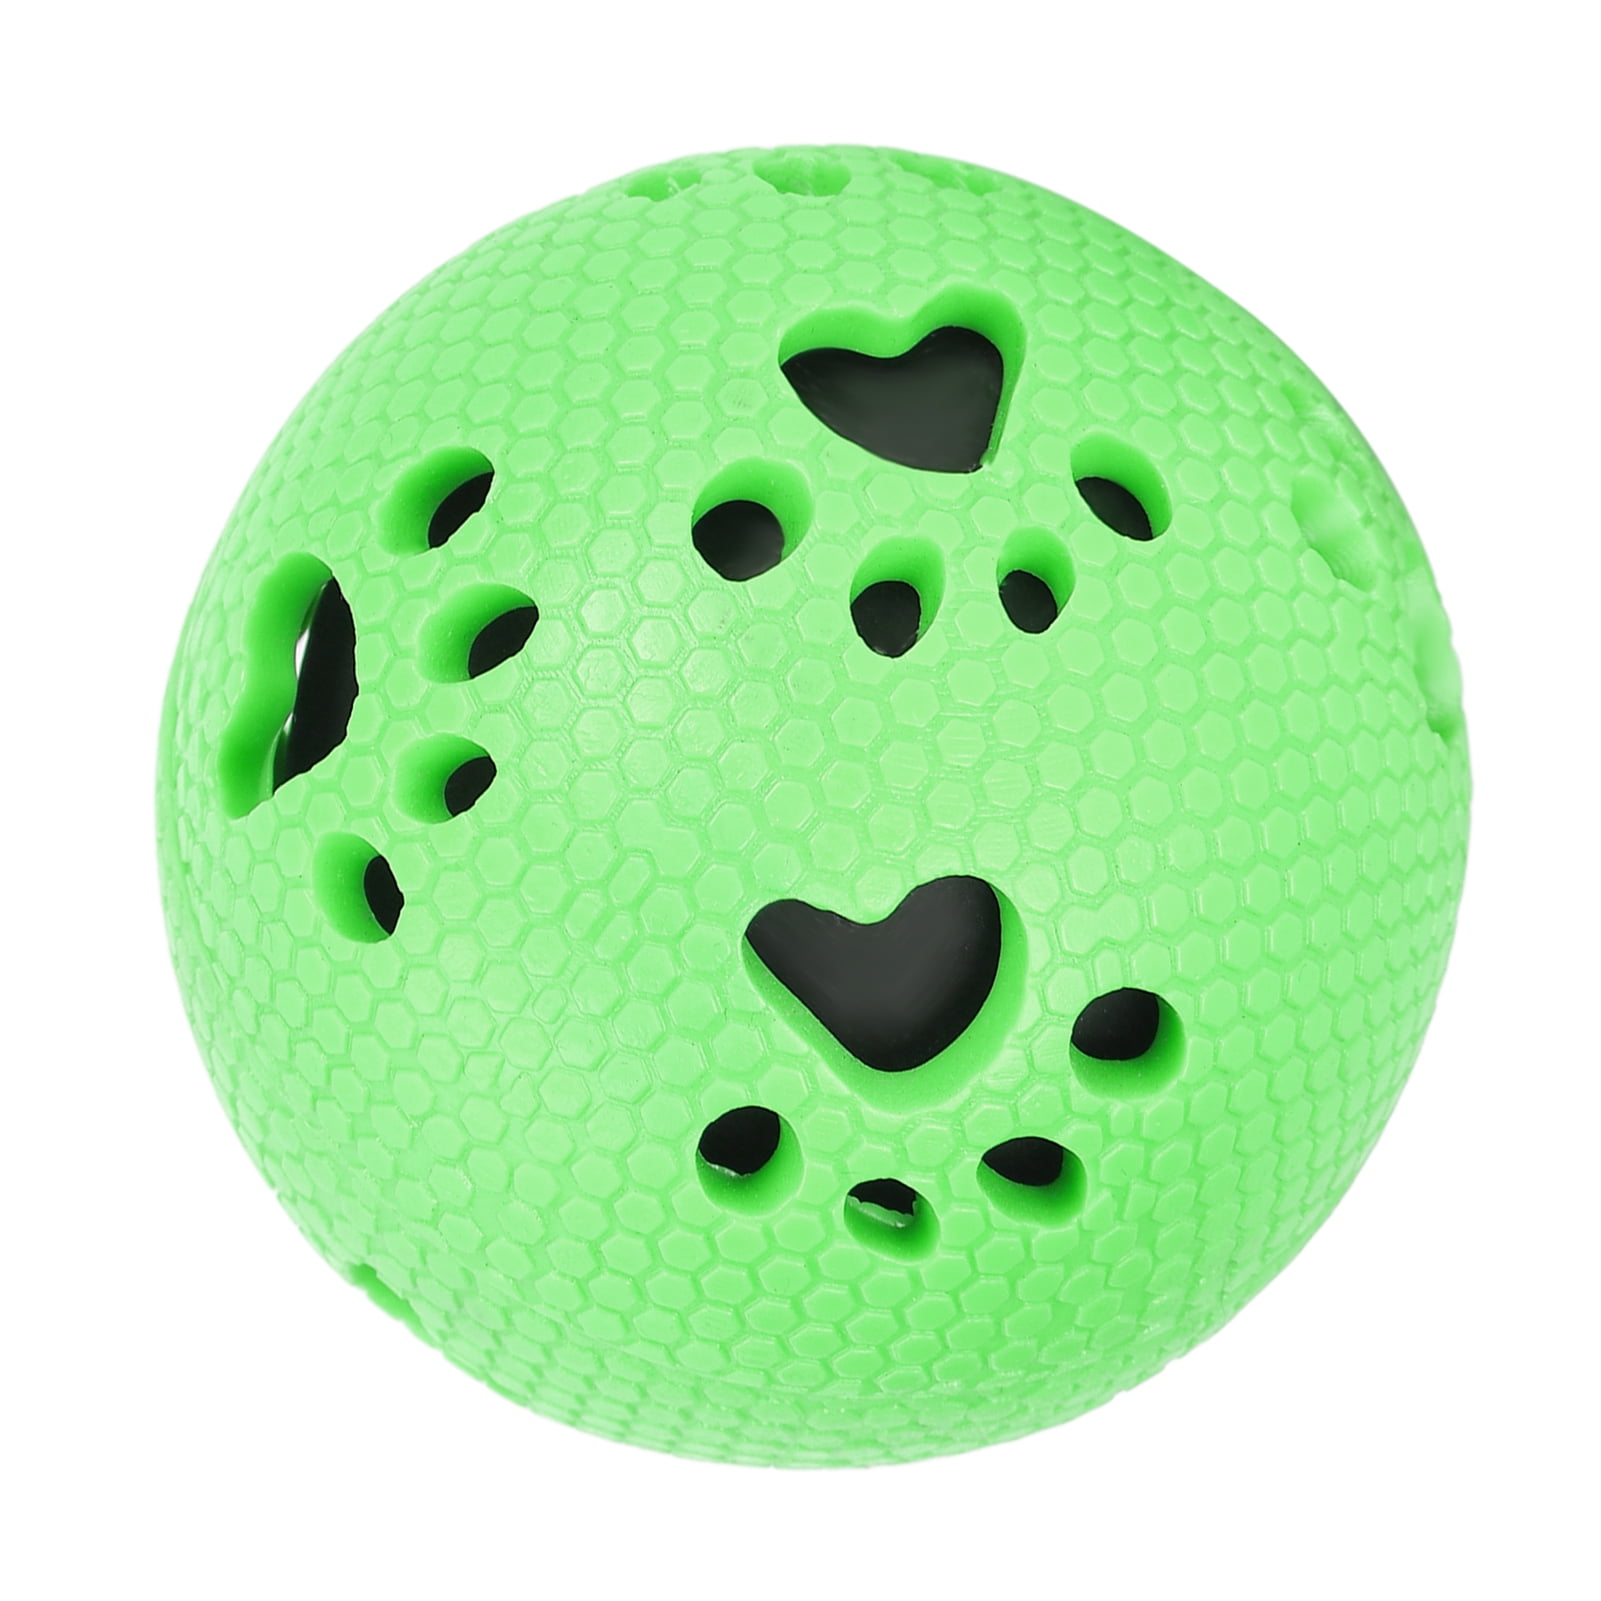 Flynn is Happy to Get His Toy- Rubber Dog Ball of Solid Dotted Rubber  [TT5##1073 7 cm solid ball] - $9.99 : Best quality dog supplies at crazy  reasonable prices - harnesses